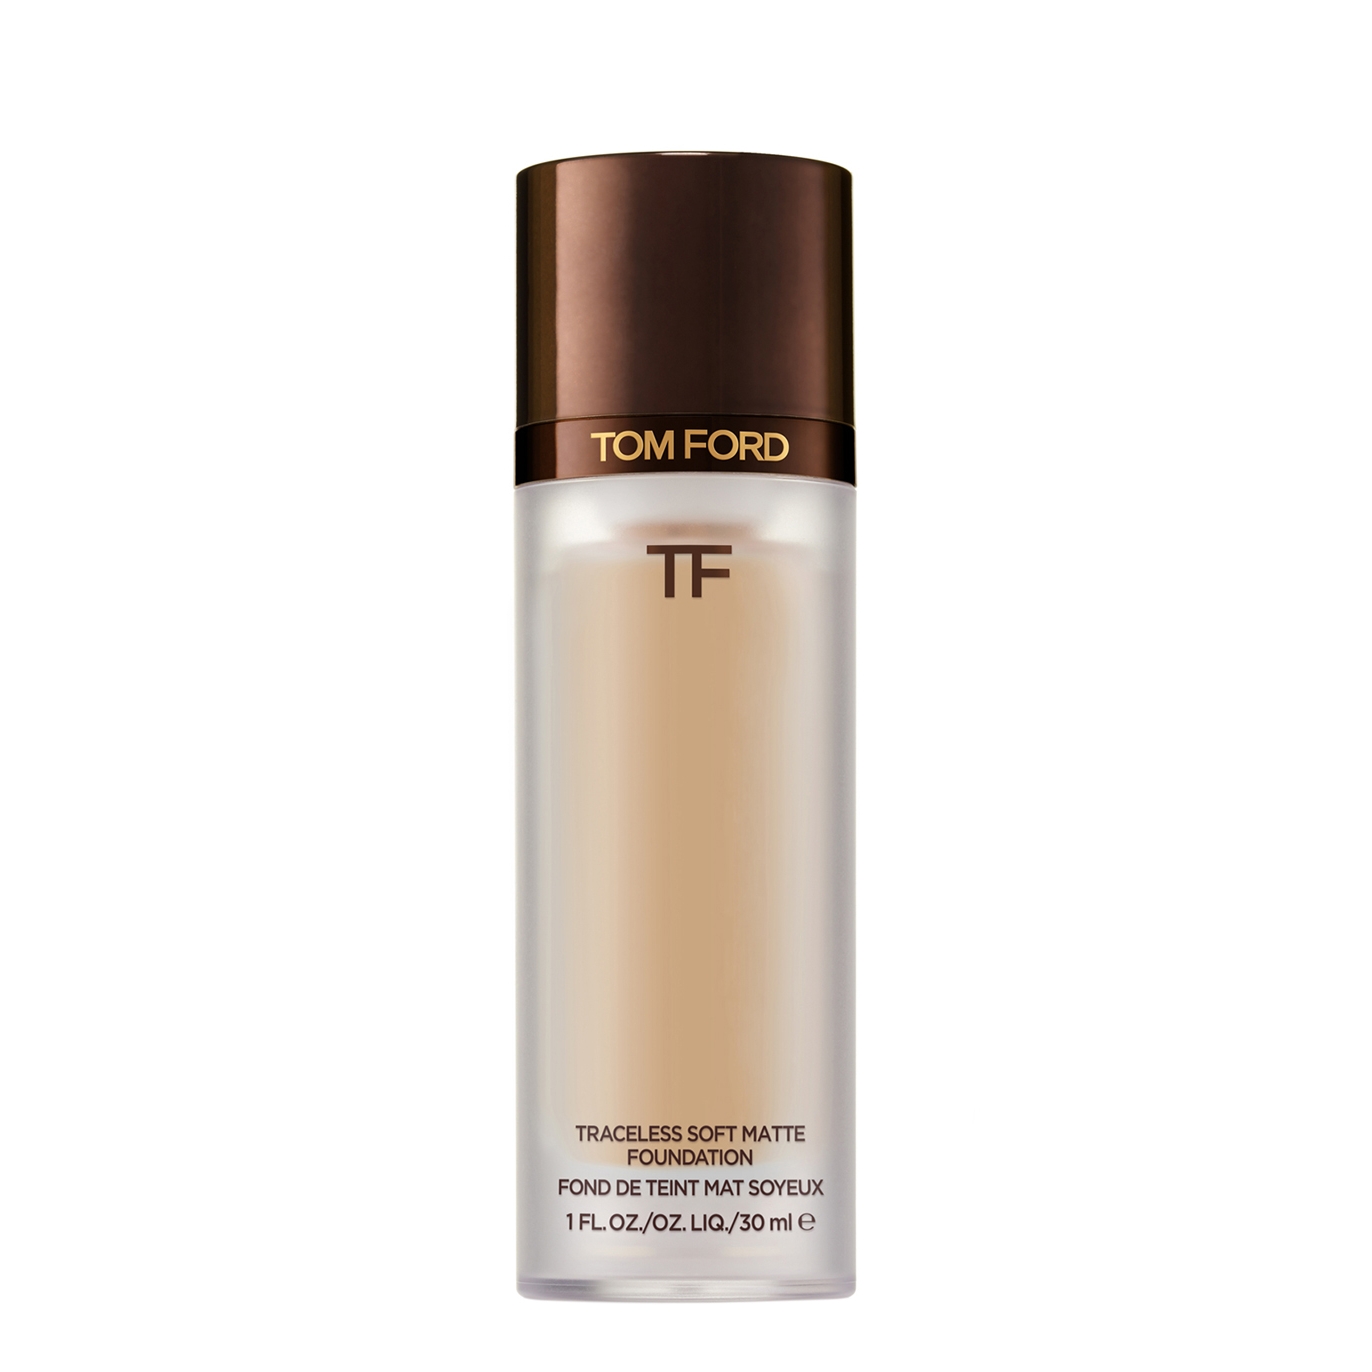 Tom Ford Traceless Soft Matte Foundation Natural 60, Matte Perfection, Long-lasting Wear In White